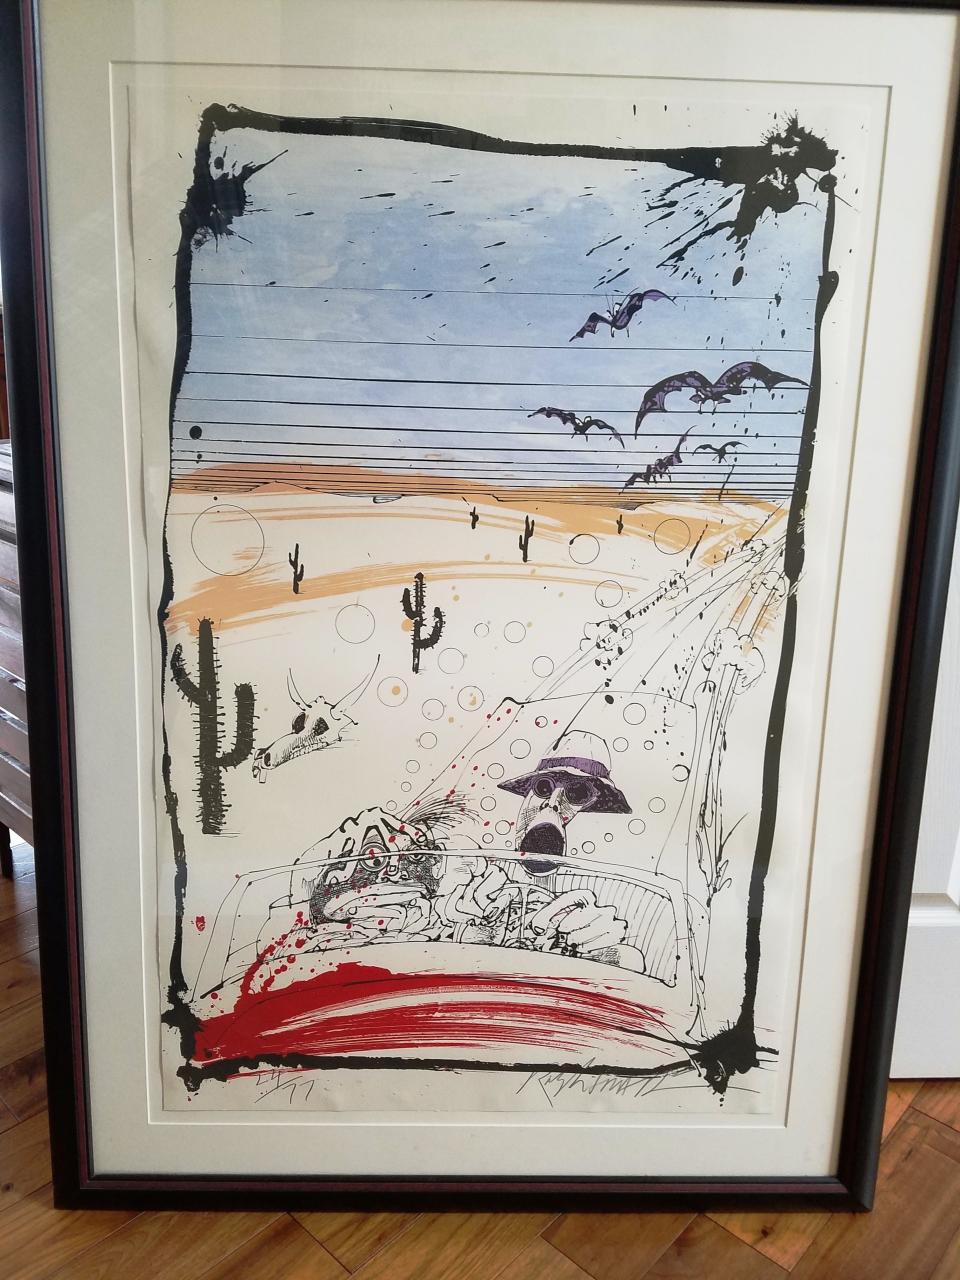 Steadman, Ralph [Thompson, Hunter]. Bats Over Barstow. [Lexington, KY]: [Petro III Graphics], [1994]. First Edition. Copy #24 of only 77 signed by Steadman of this large (26" x 40" framed to an overall size of 36" x 50") color silkscreen print, a redrawn version of the illustration for the cover of Fear and Loathing in Las Vegas.